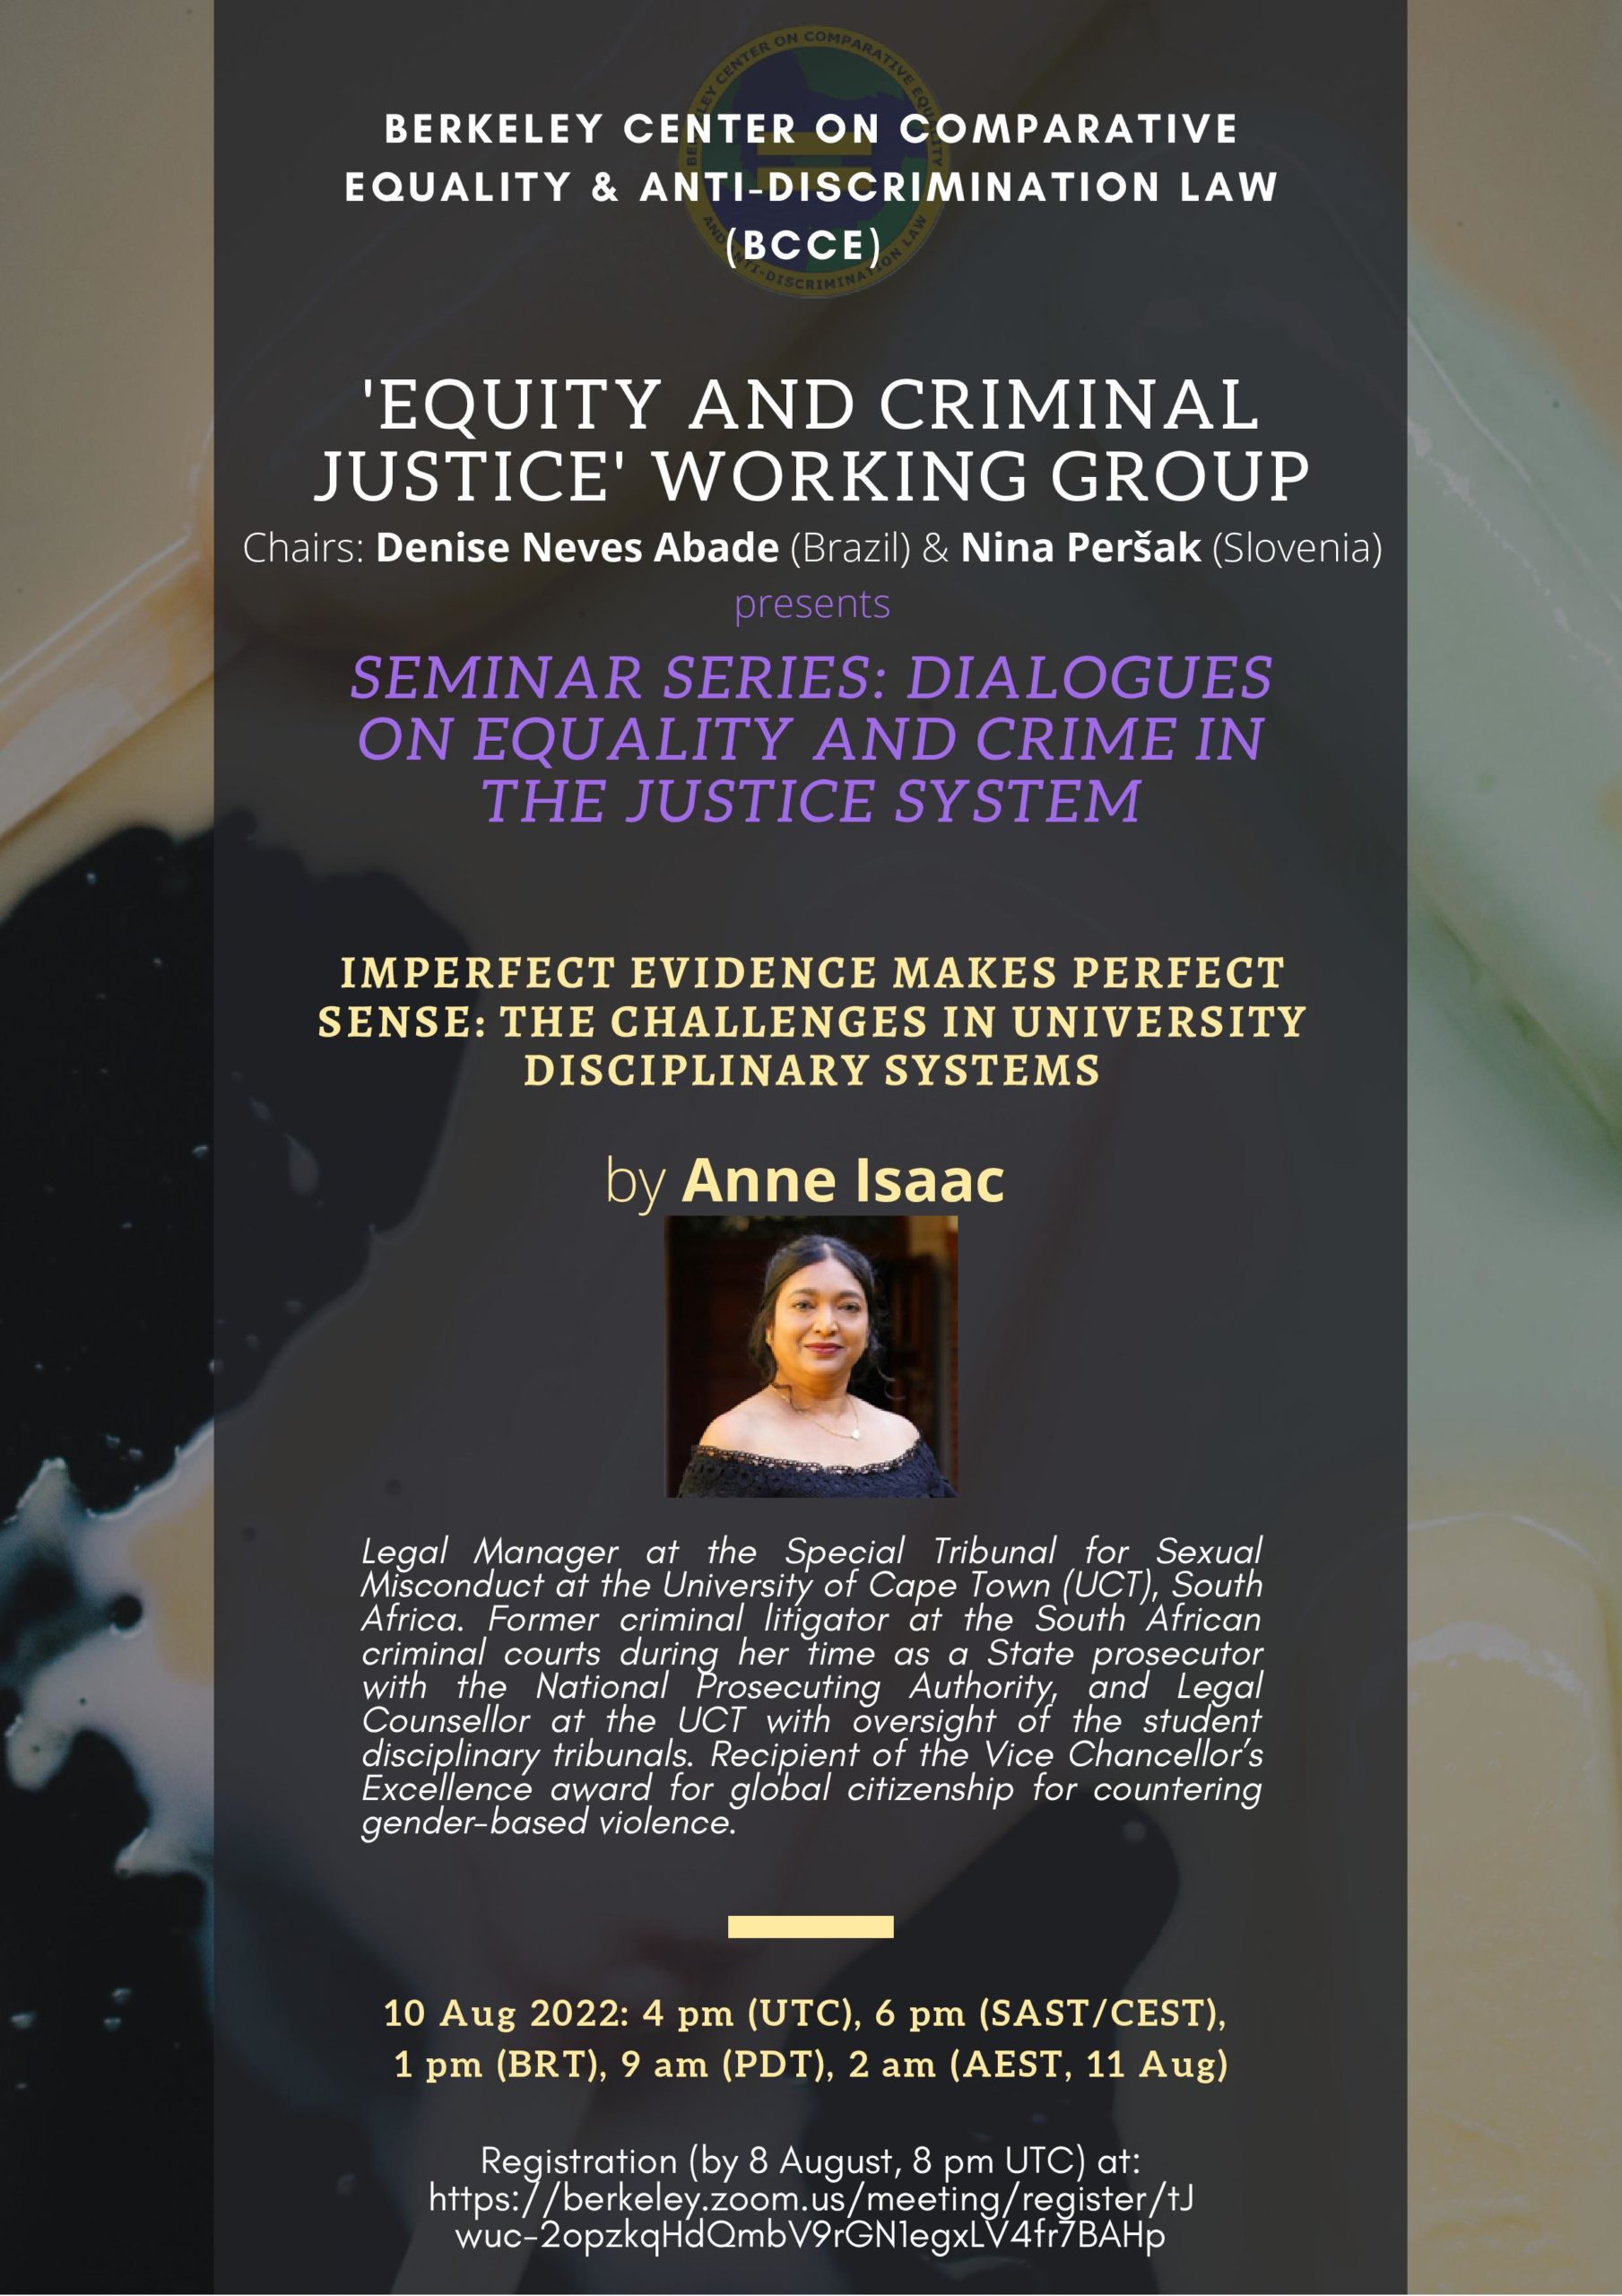 Seminar Series: Dialogues on Equality and Crime in the Justice System